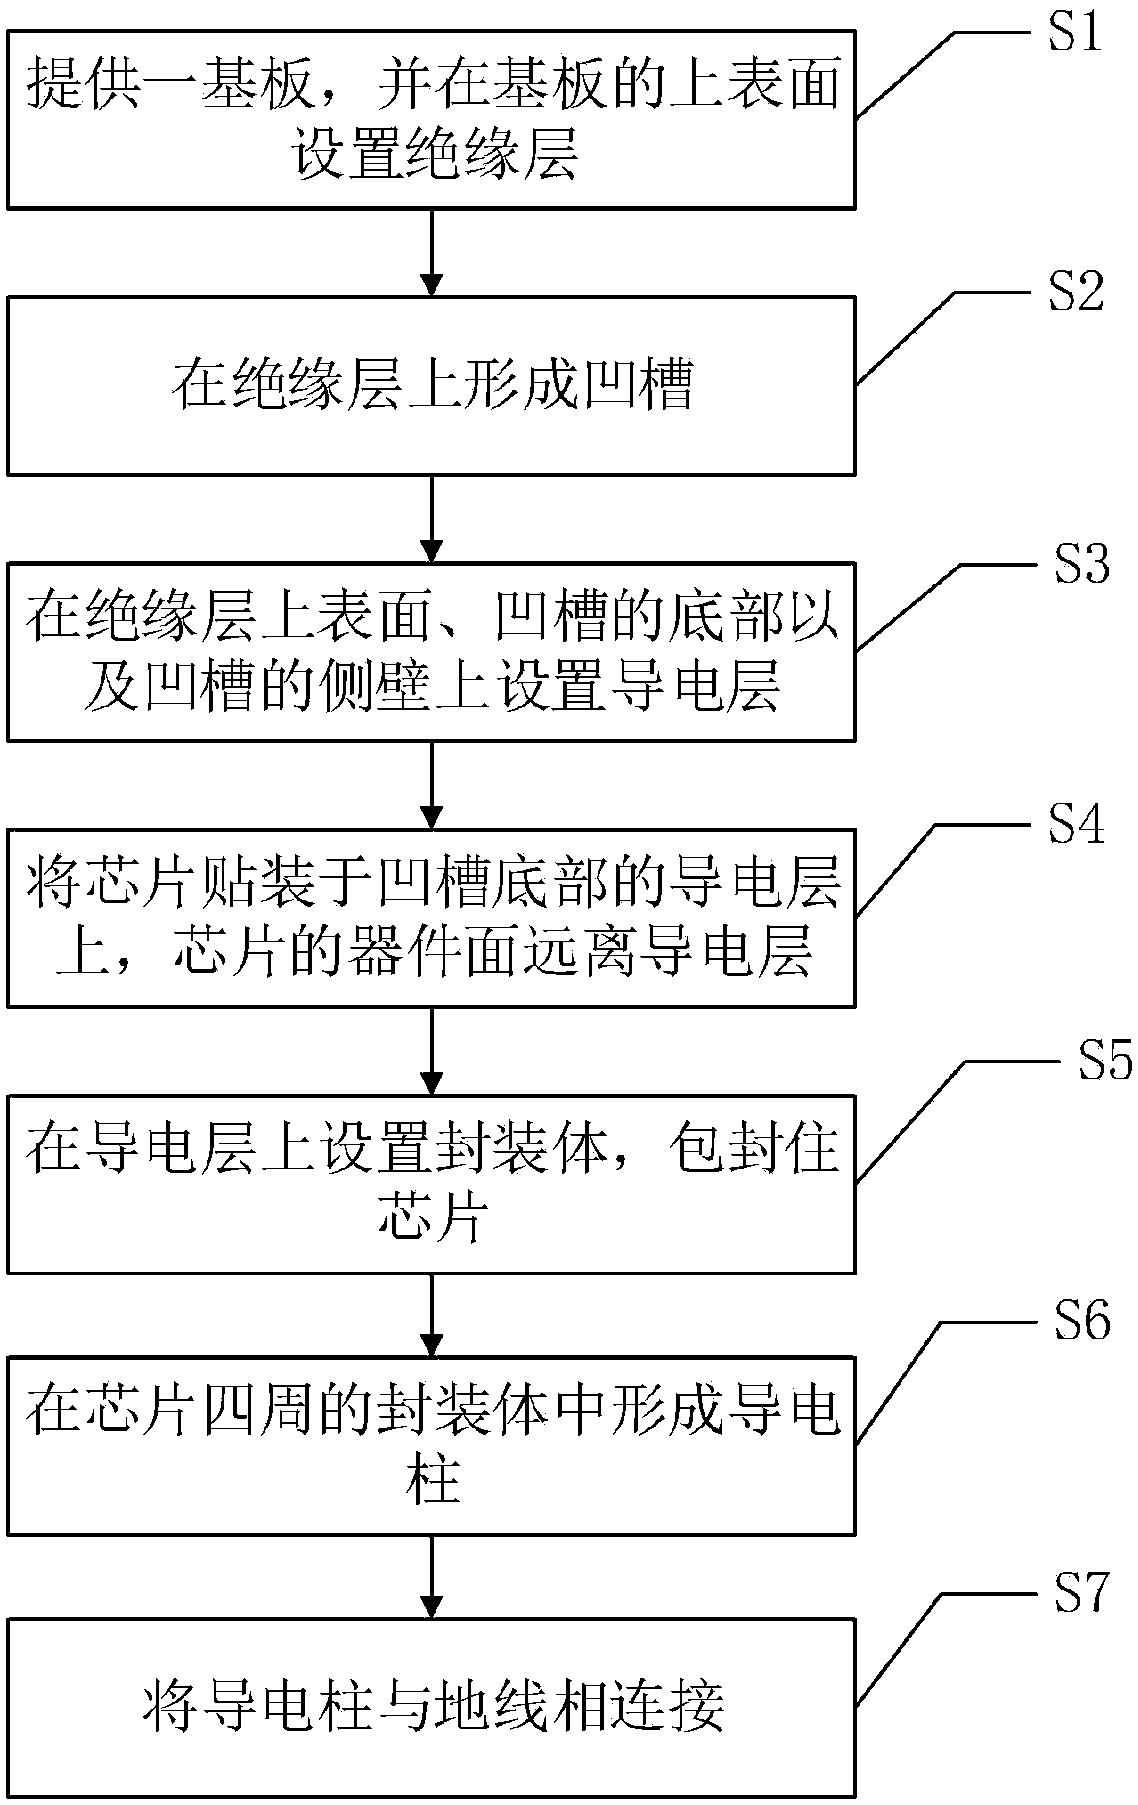 Fan-out wafer-level chip packaging structure and method